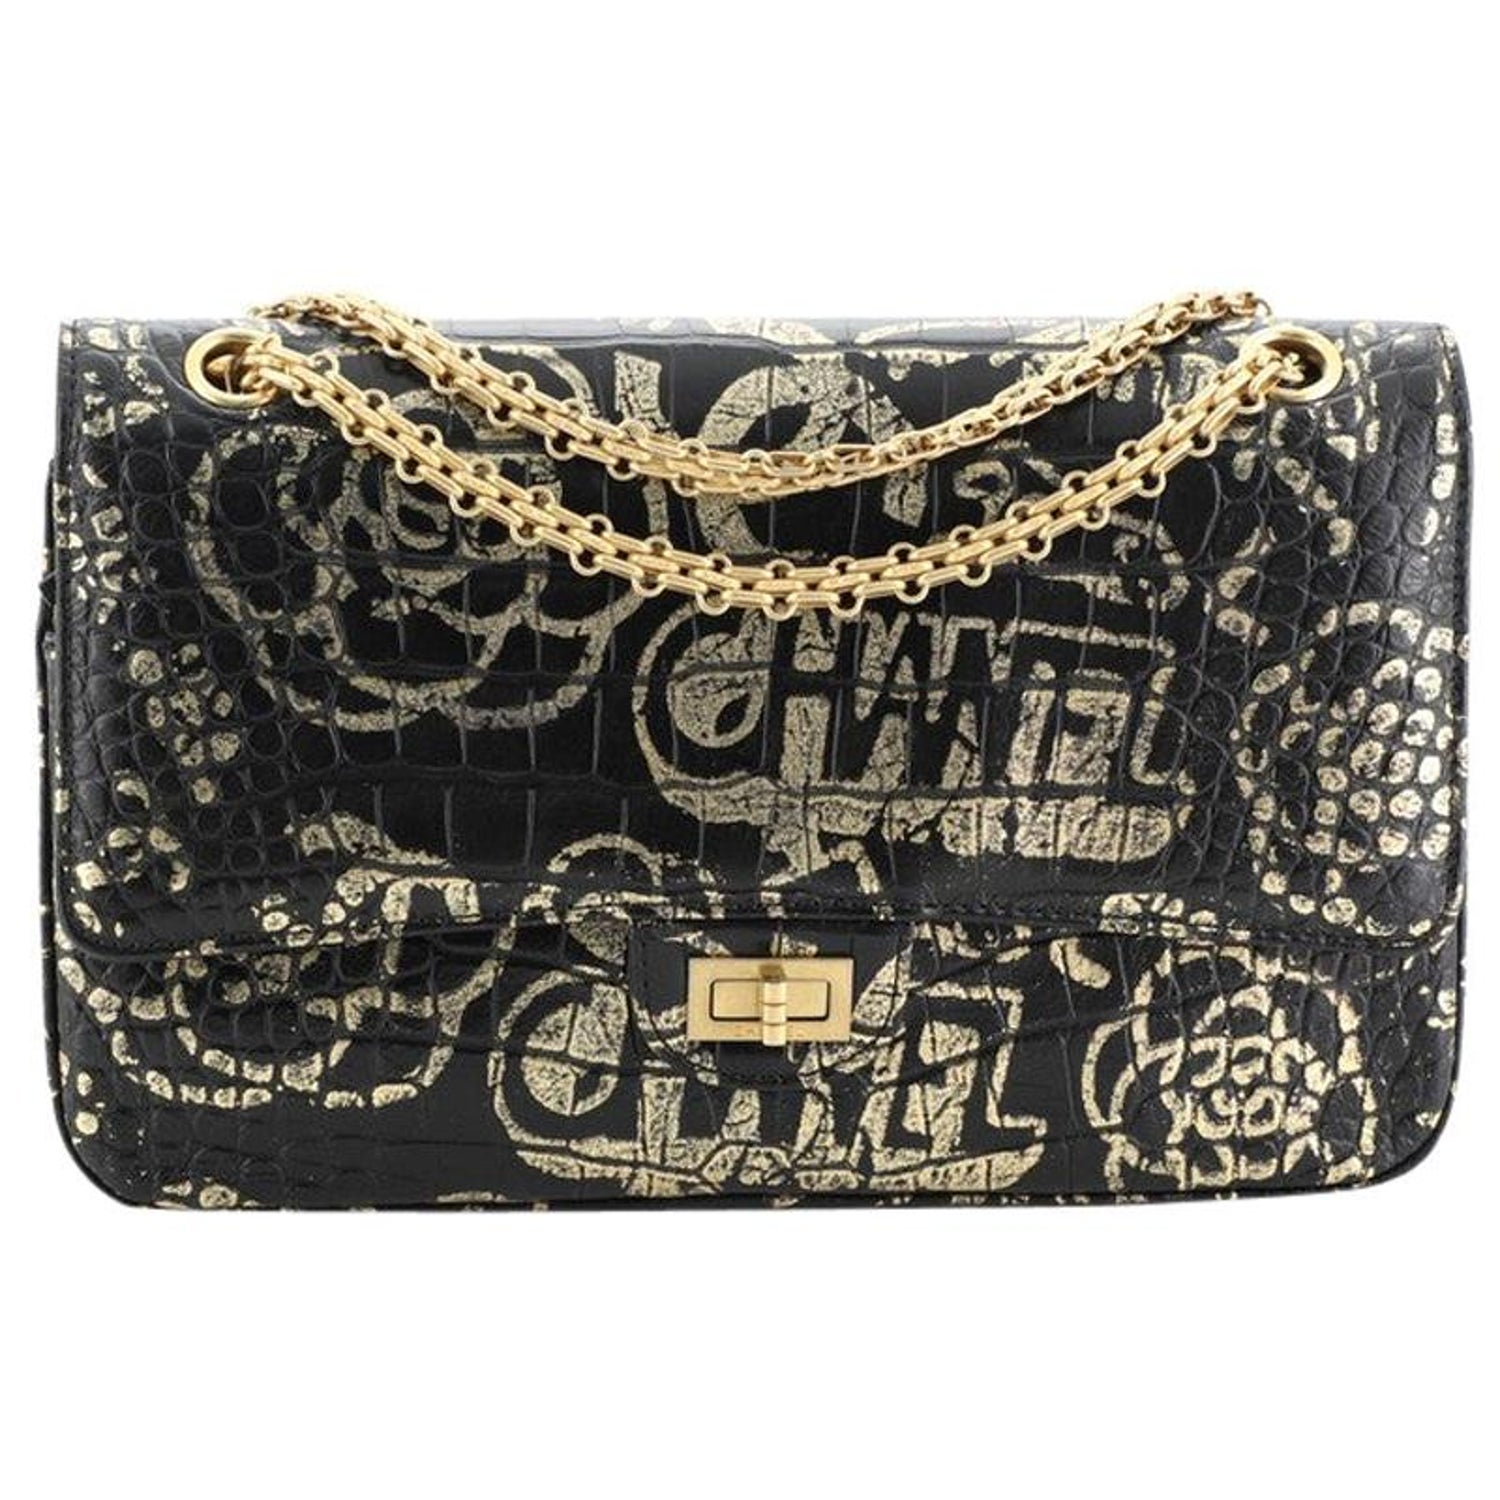 Get the best deals on CHANEL 2.55 Leather Exterior Quilted Bags